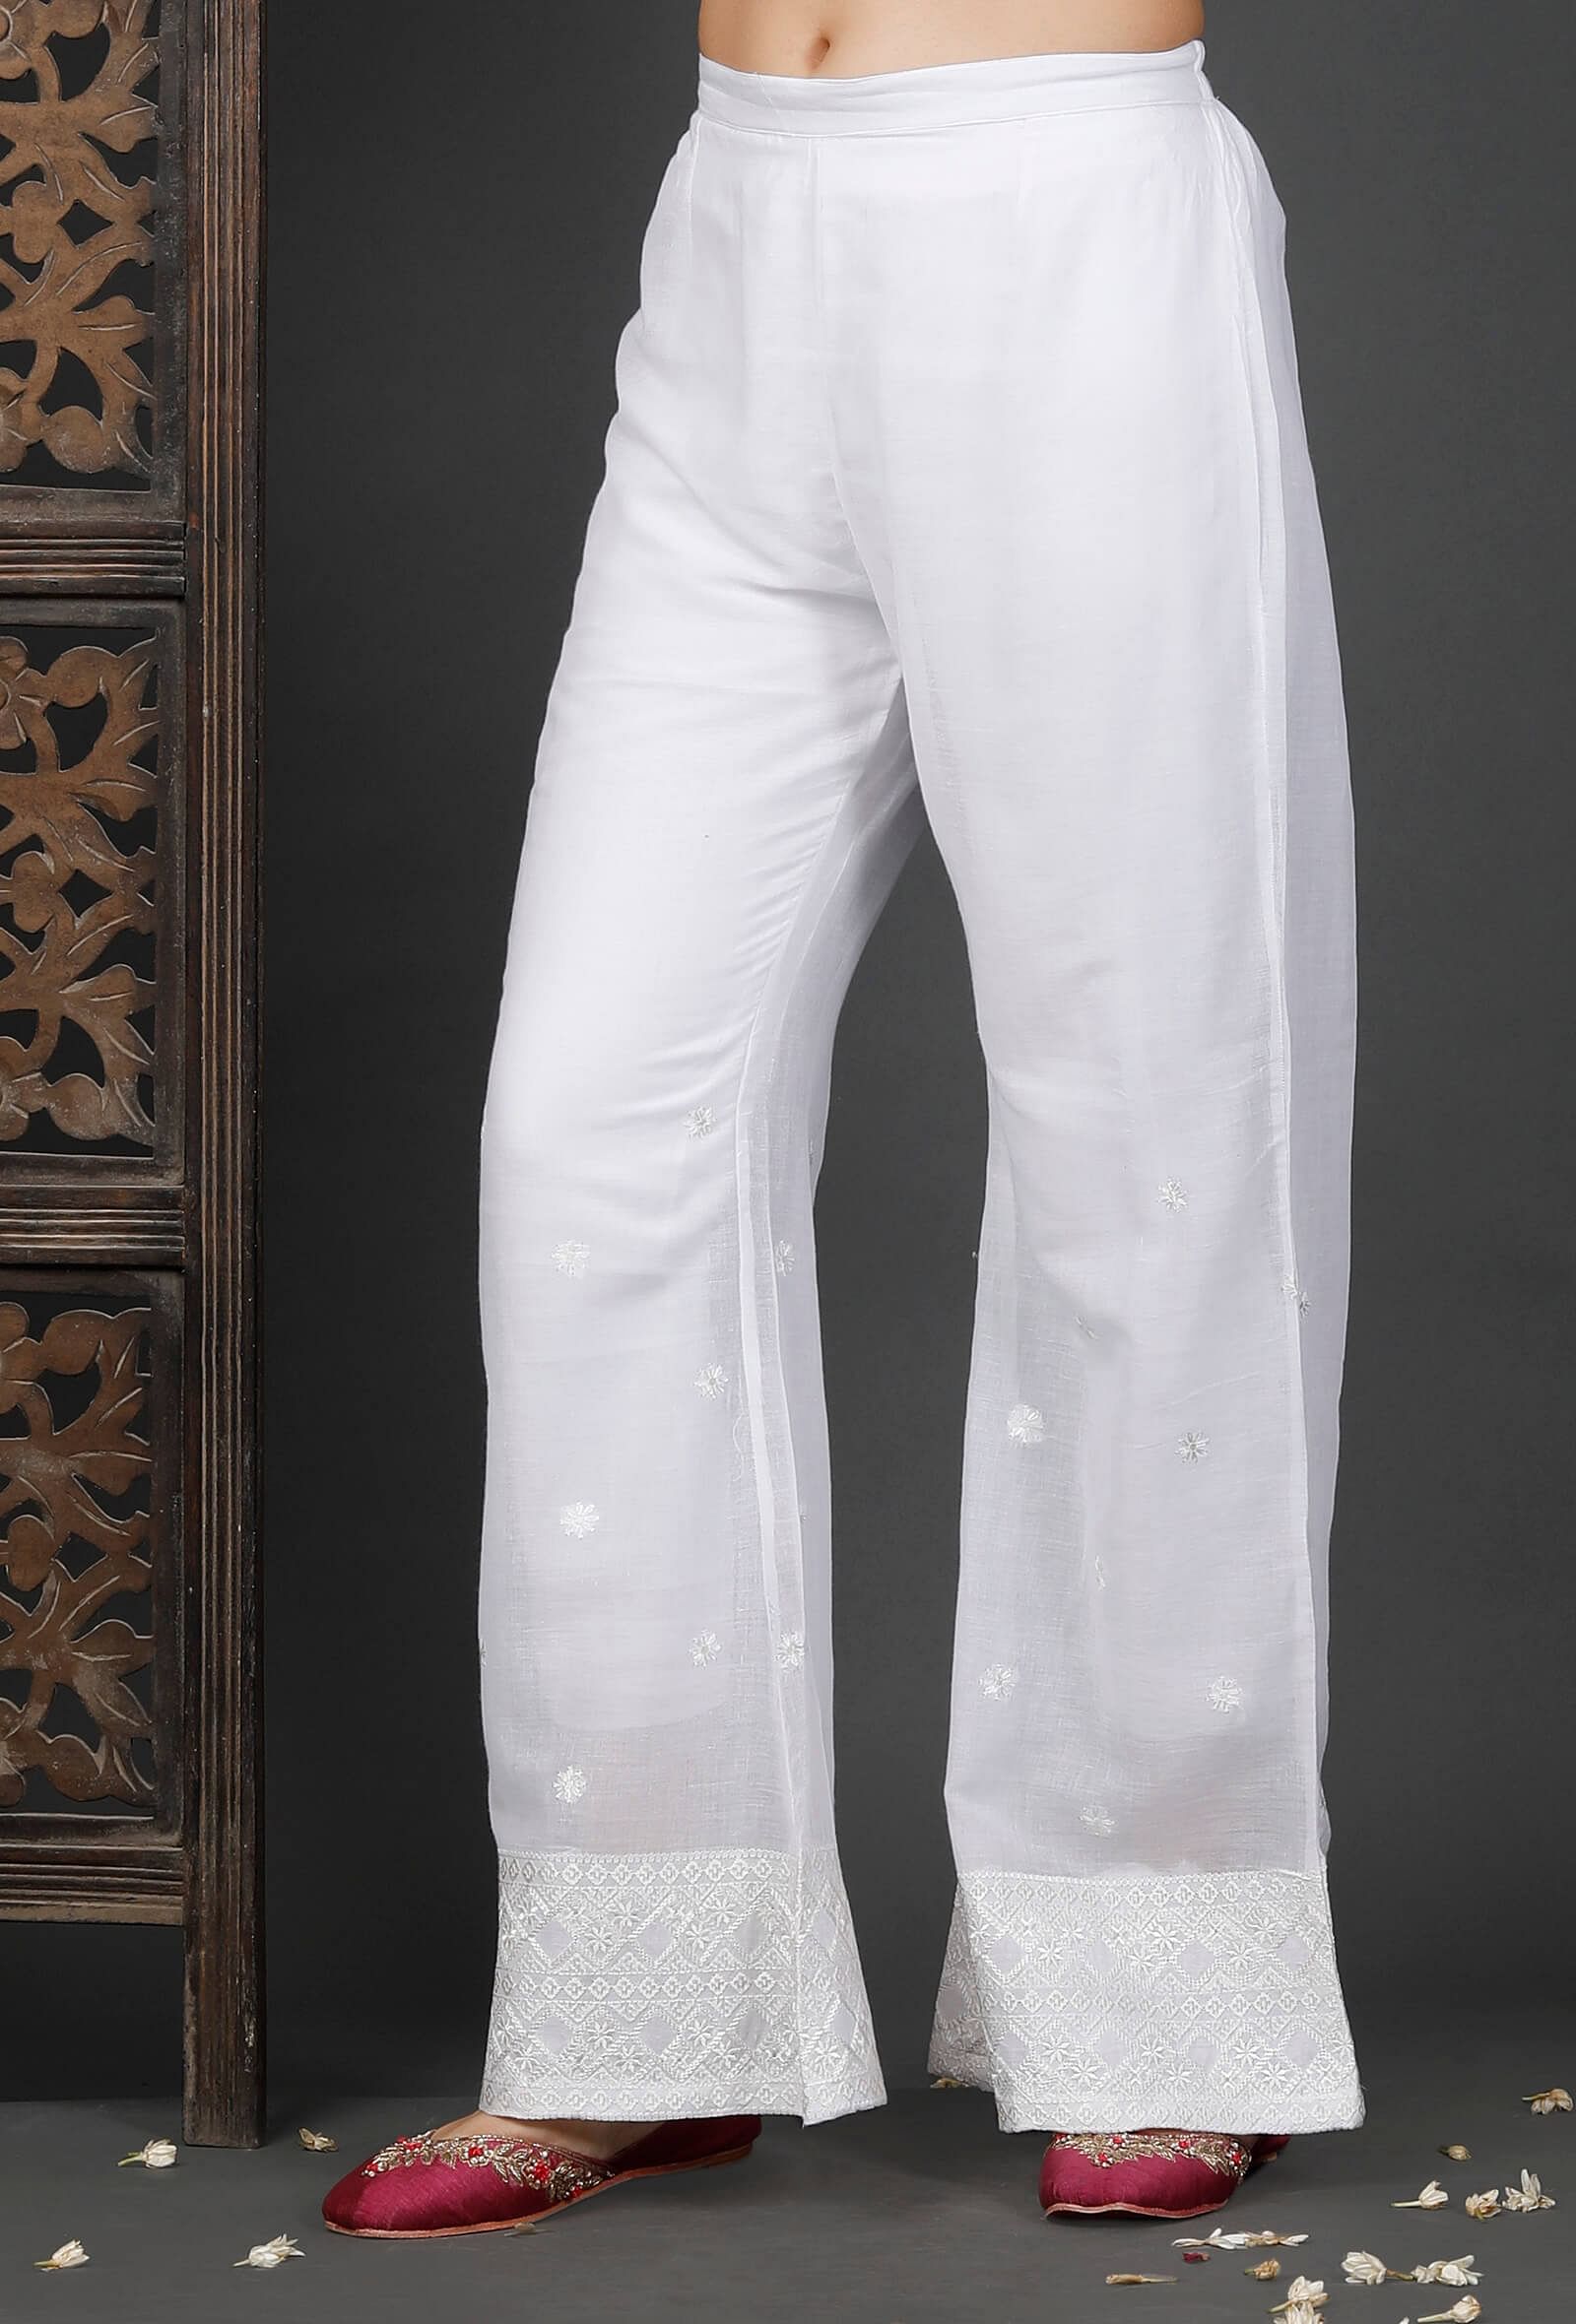 White Cotton Flower Embroidered Palazzos